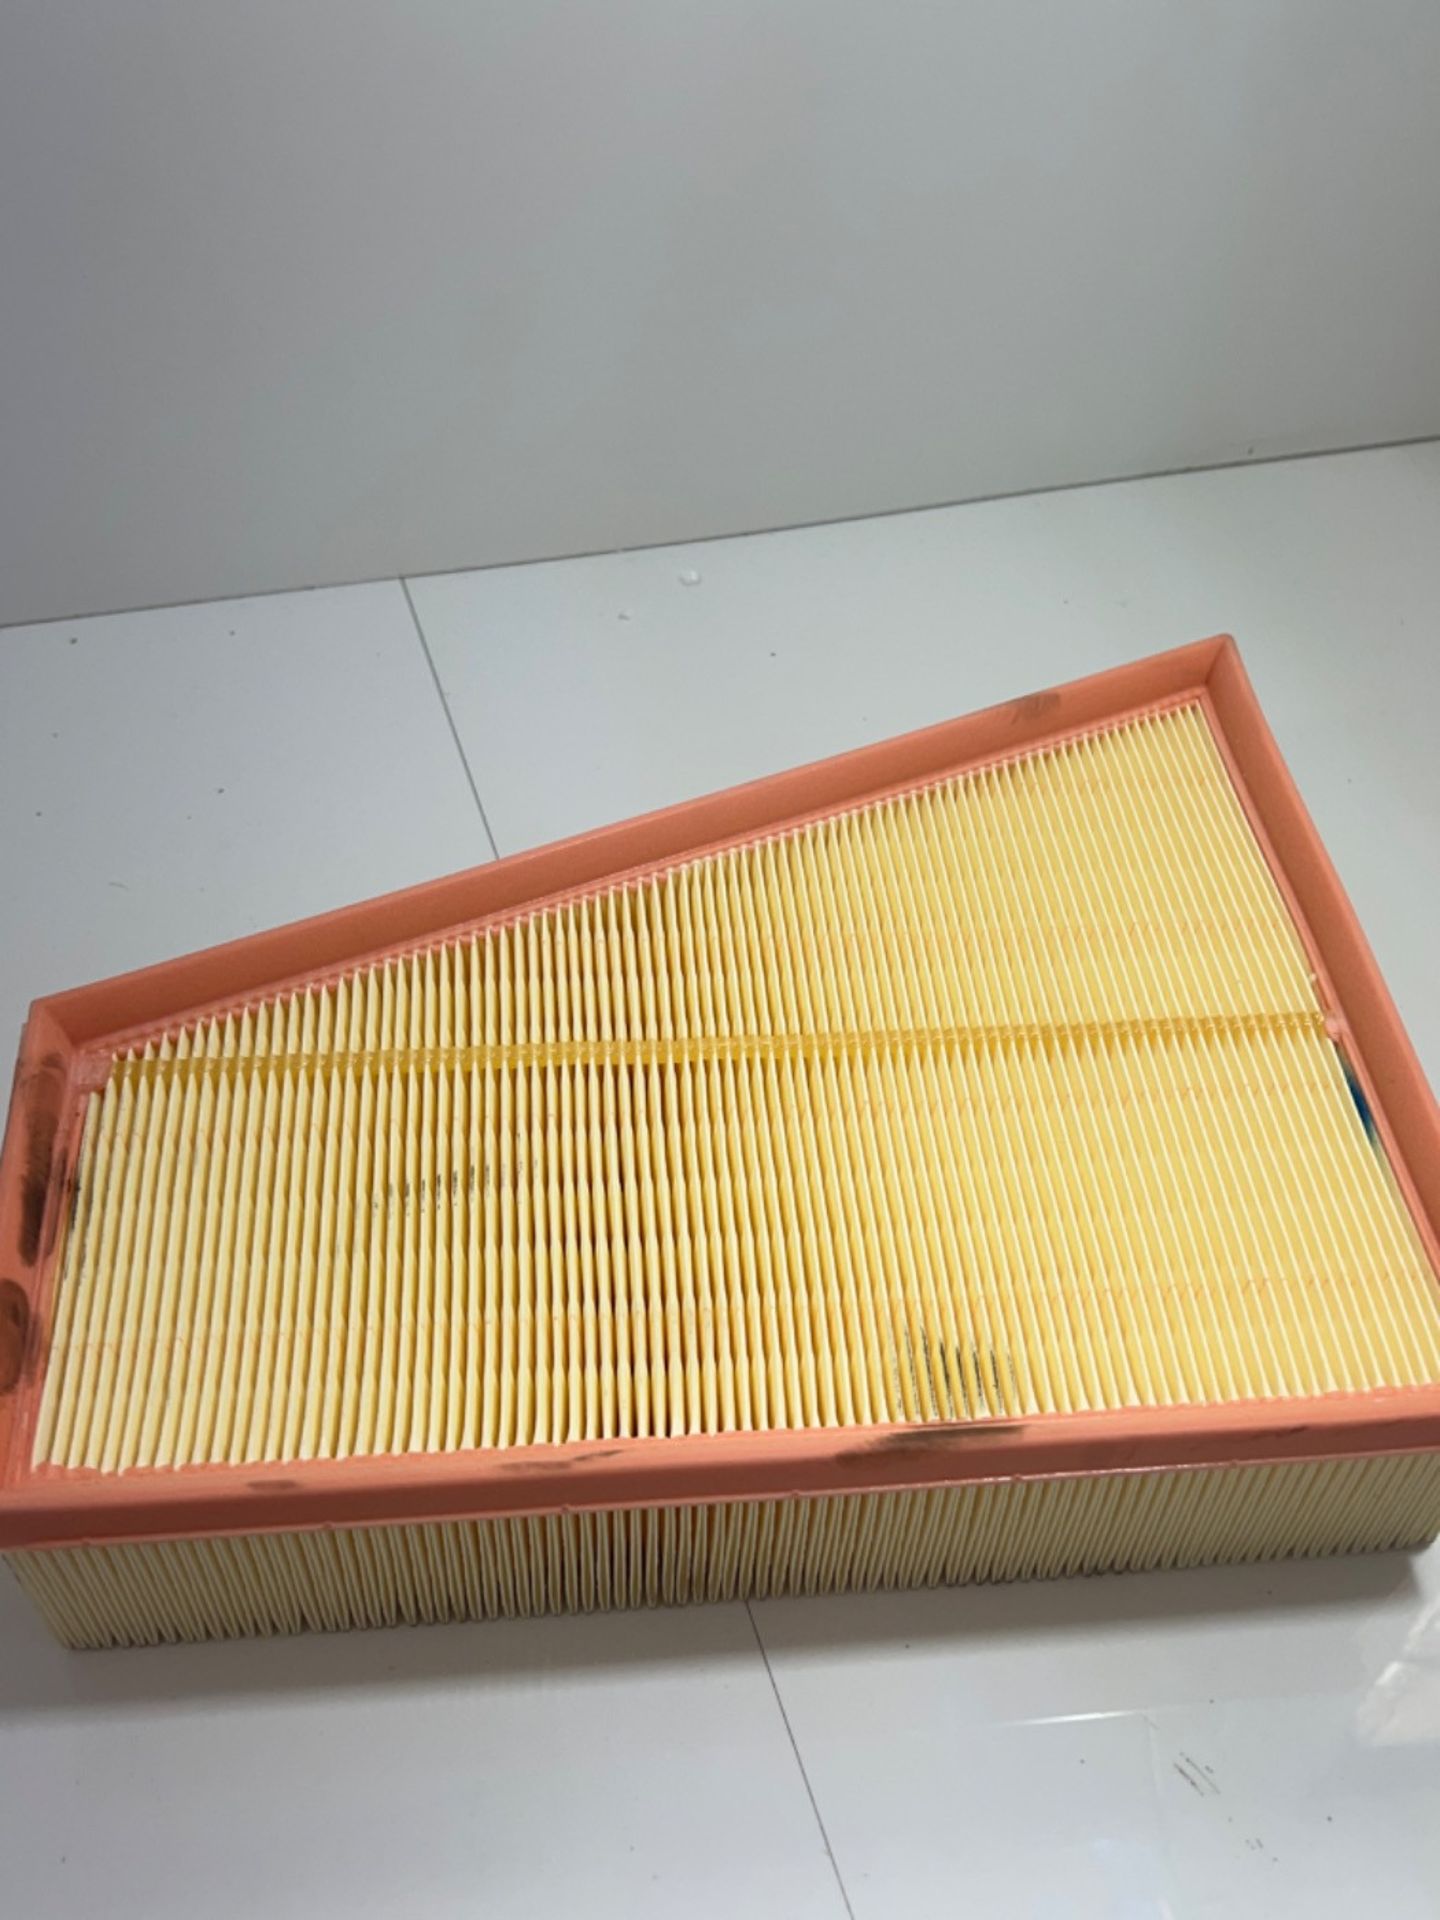 Bosch S0109 - Air Filter Car - Image 3 of 3